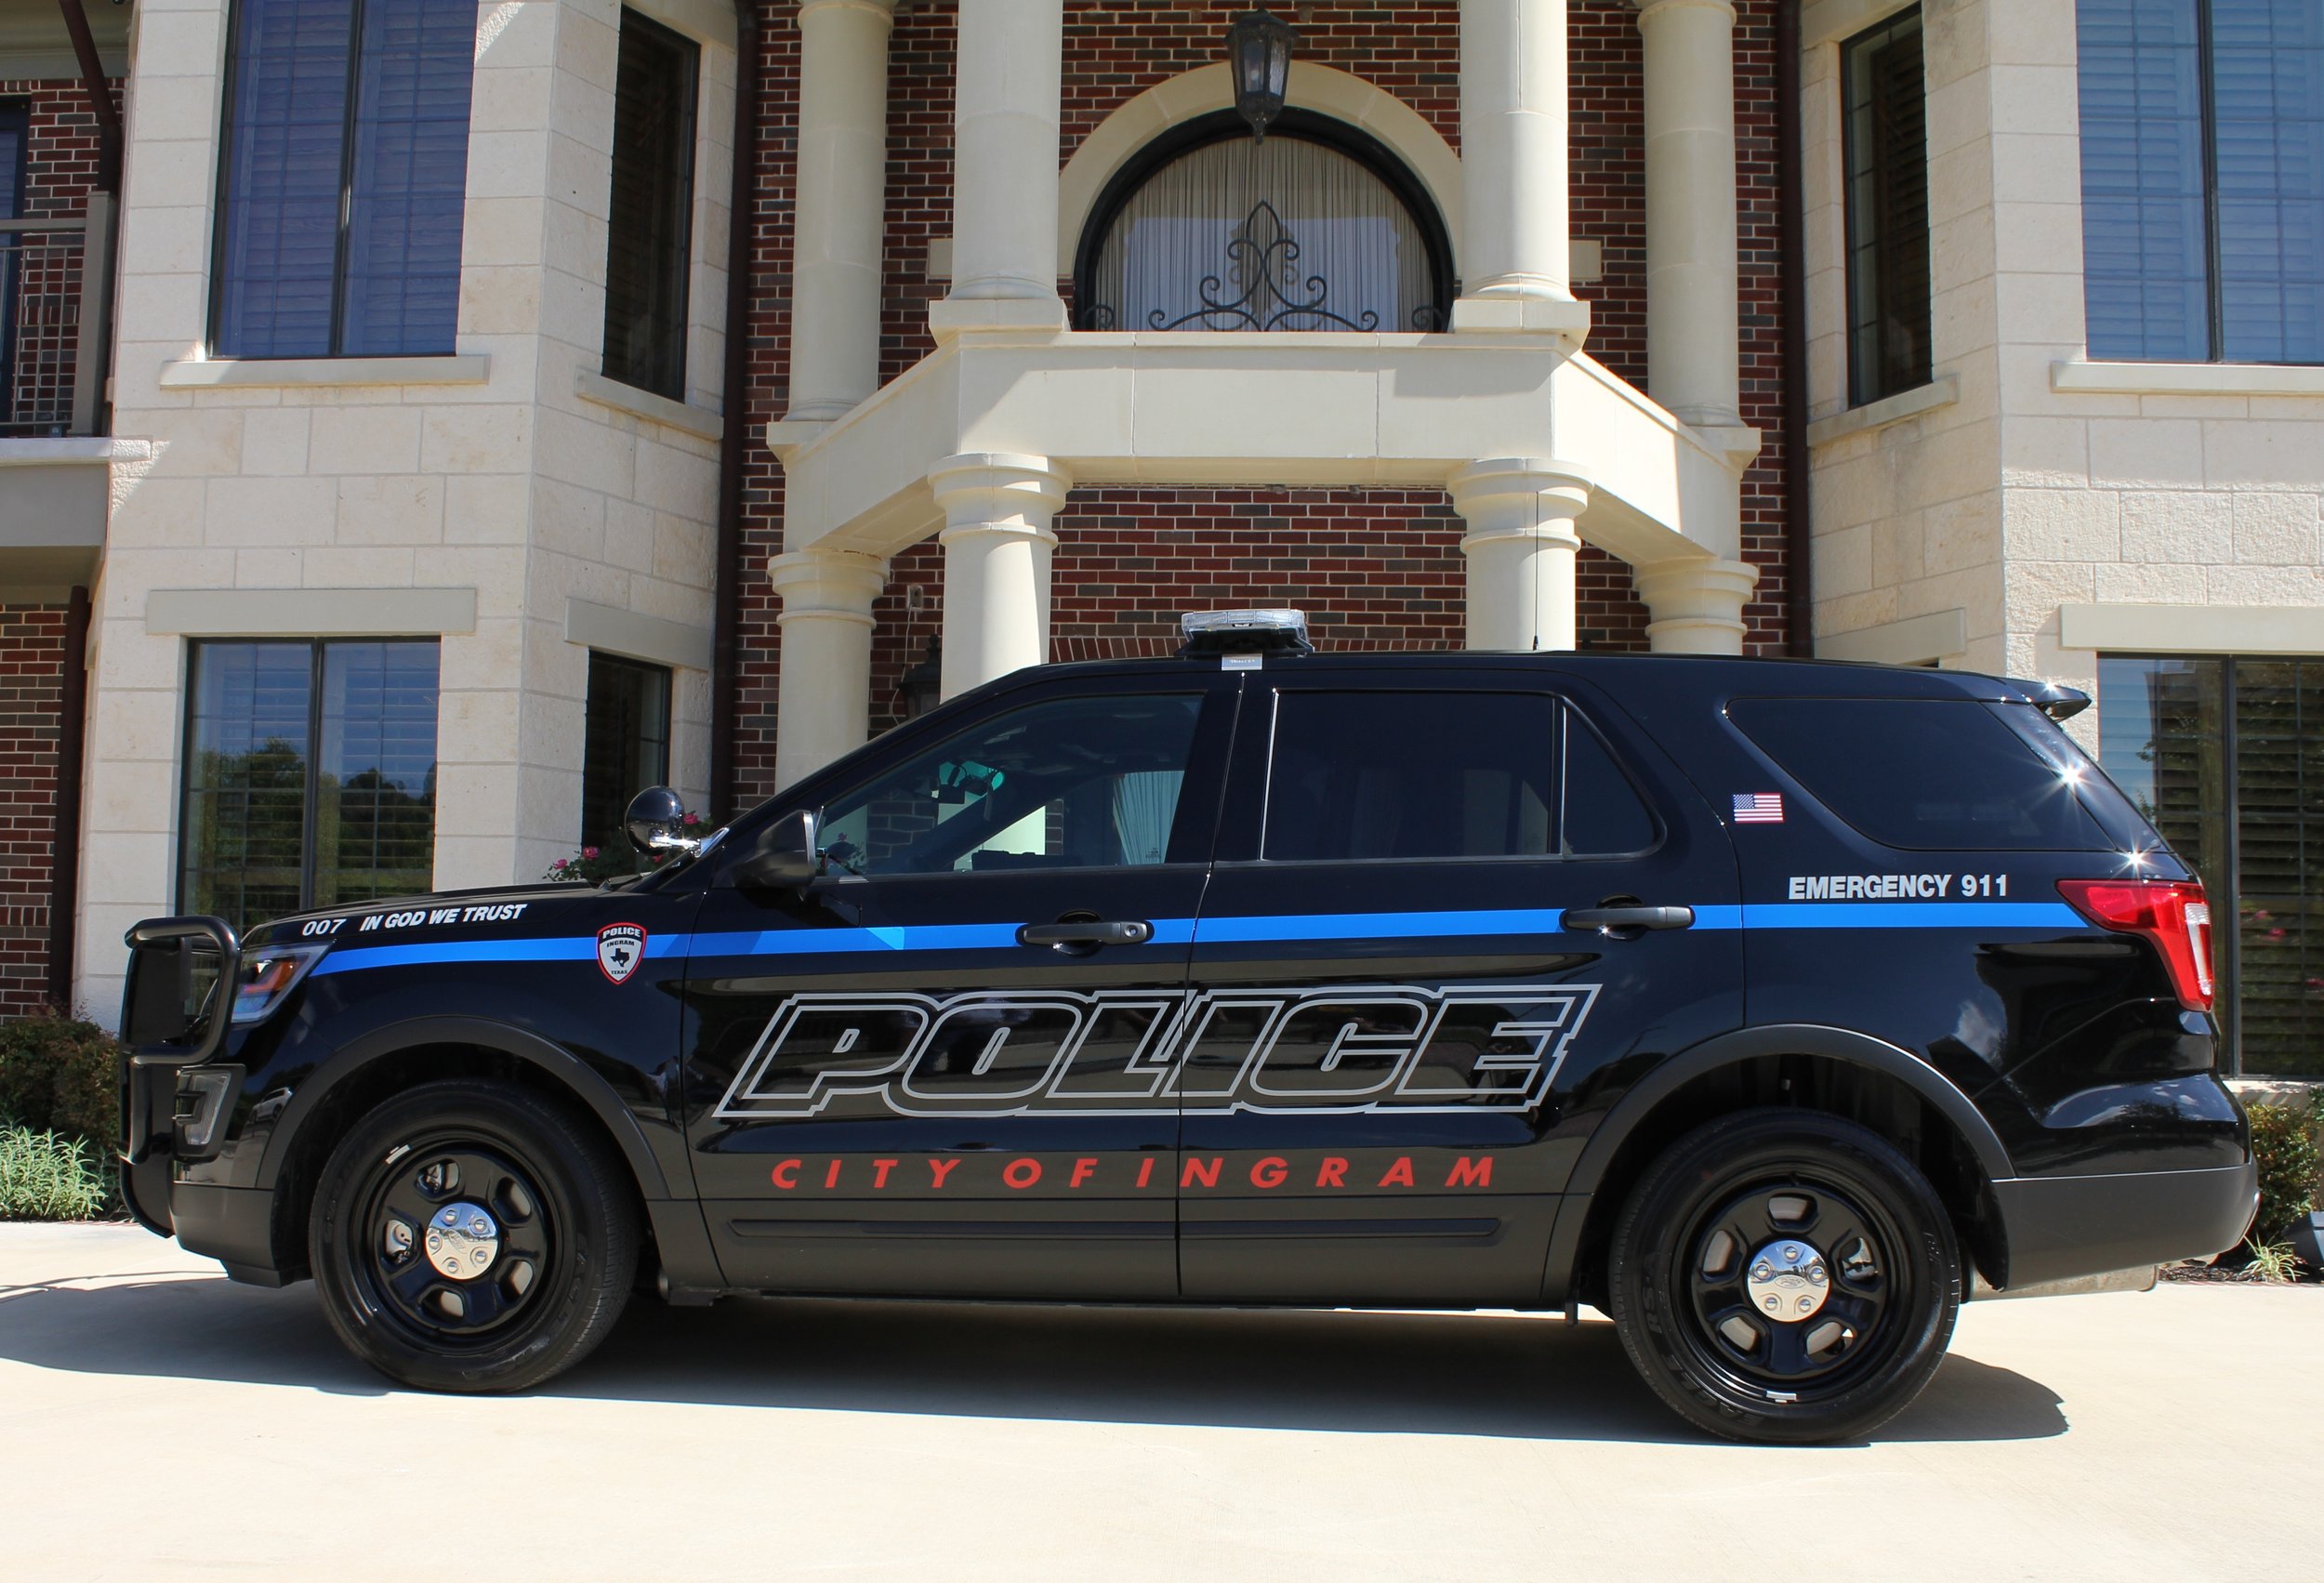   2017 - Ingram Police Department patrol vehicle at The Cailloux Foundation office, Kerrville, Texas  